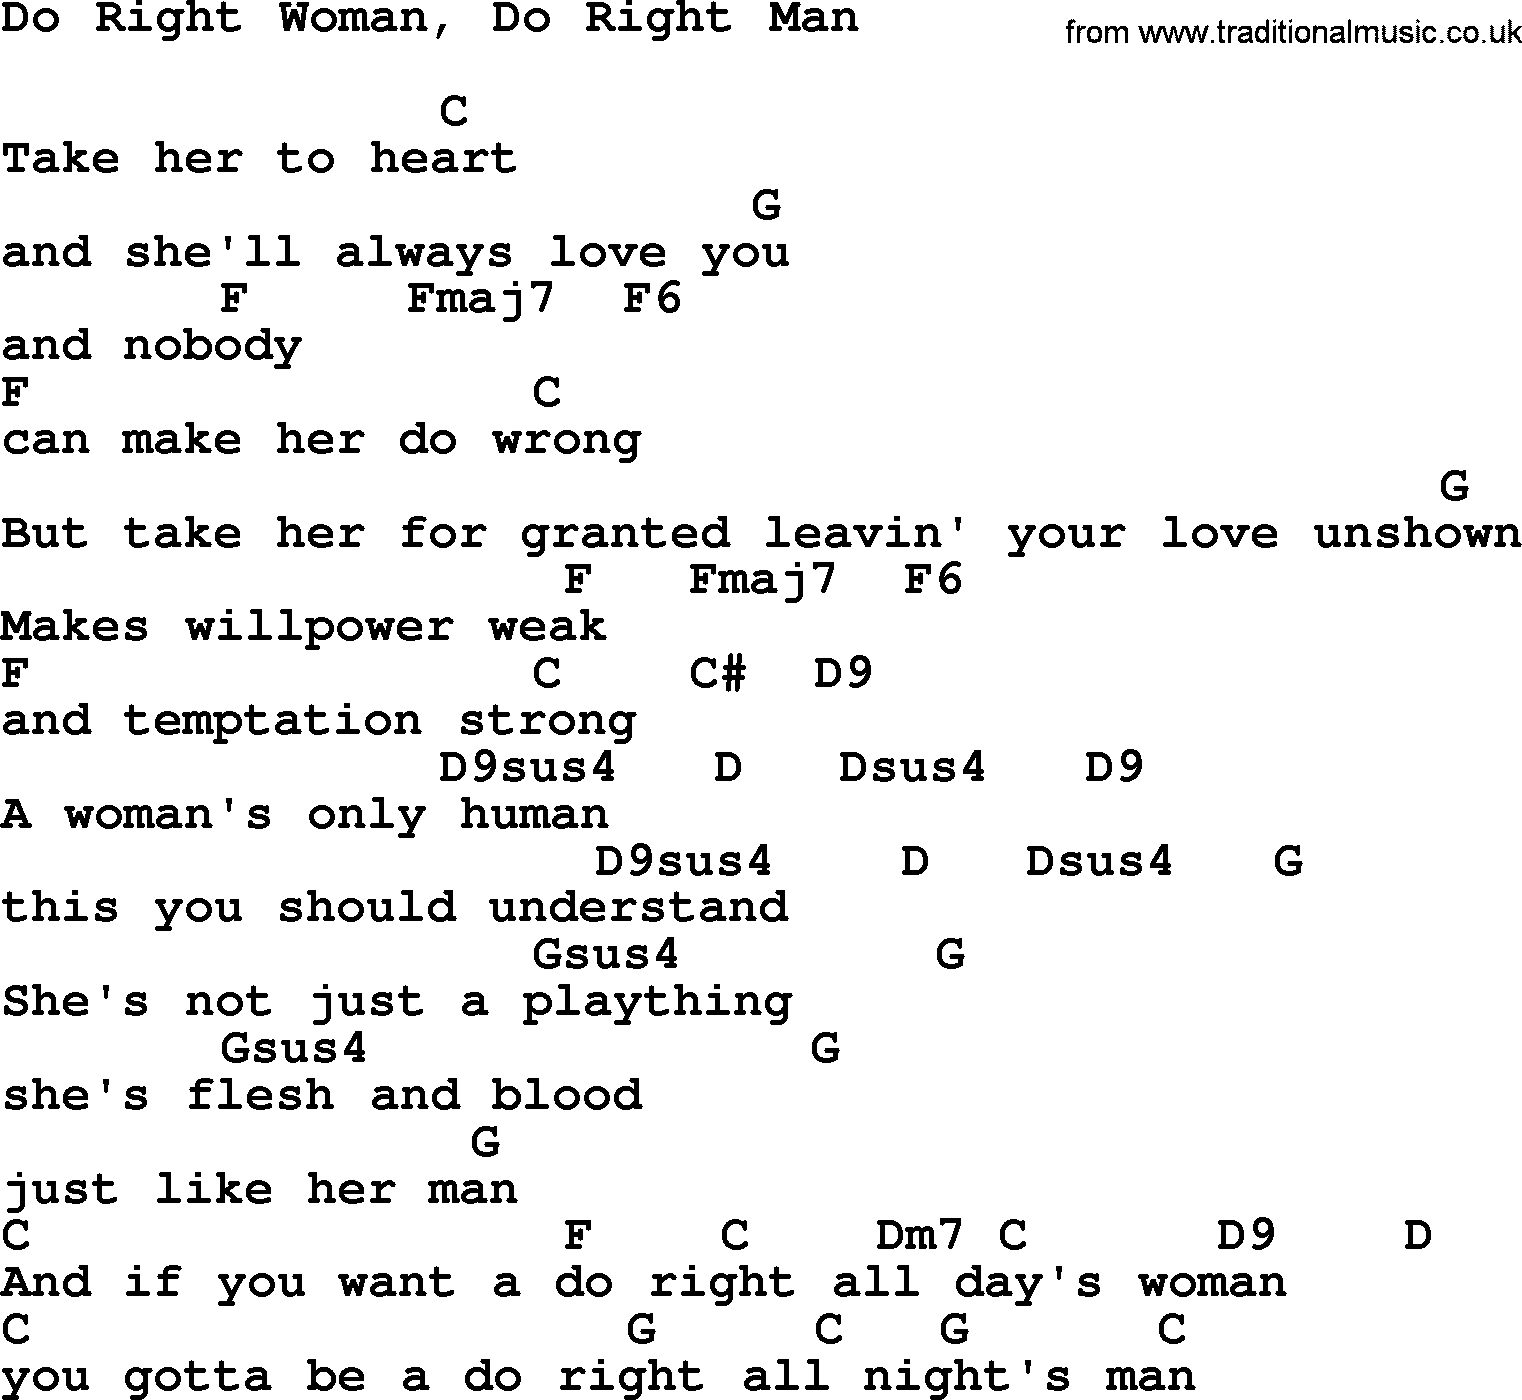 Willie Nelson song: Do Right Woman, Do Right Man, lyrics and chords